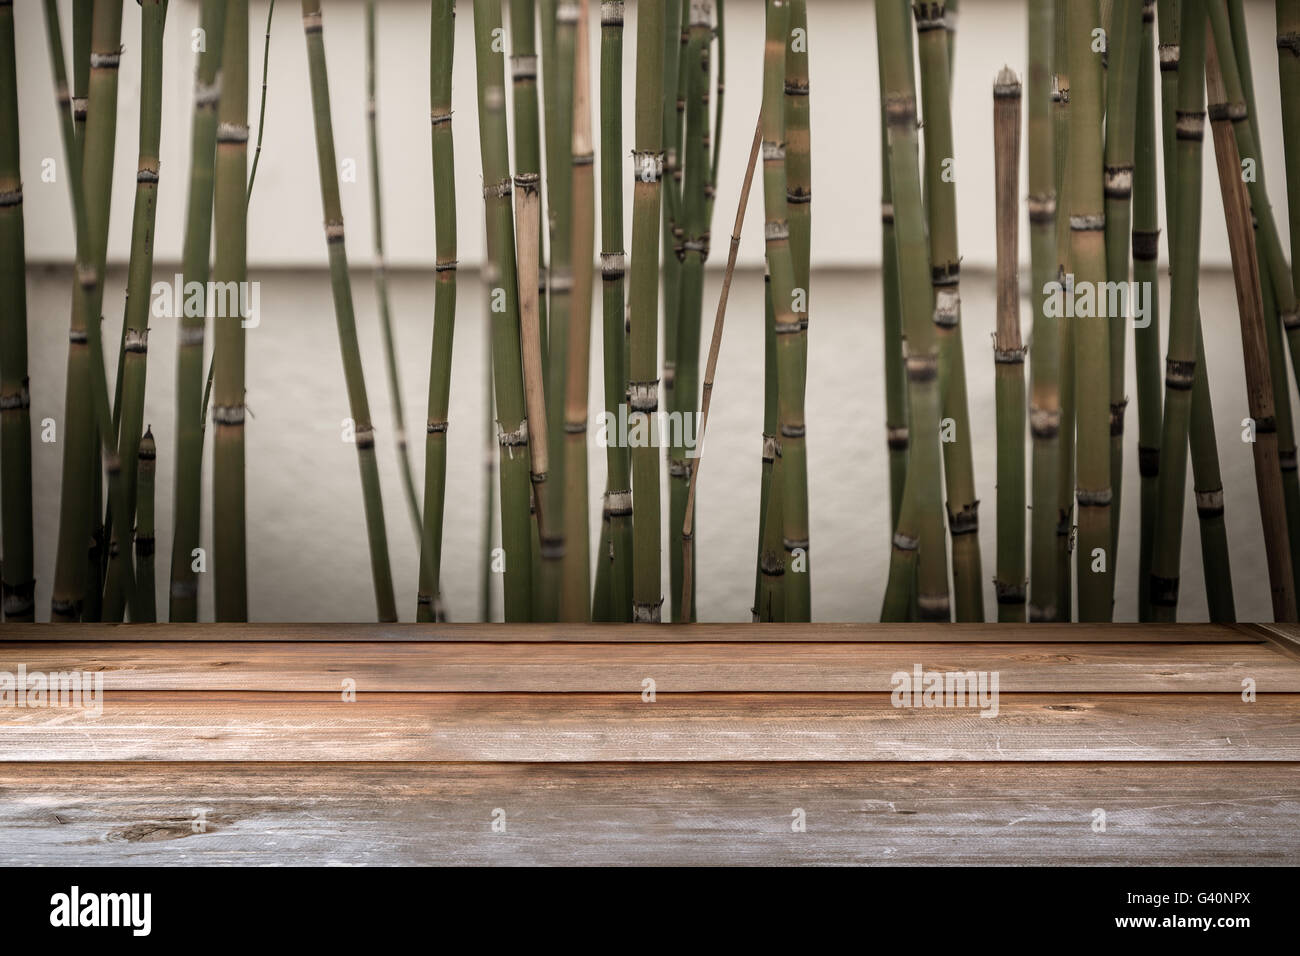 Wood tabletop in perspective view with bamboo vintage background Stock Photo